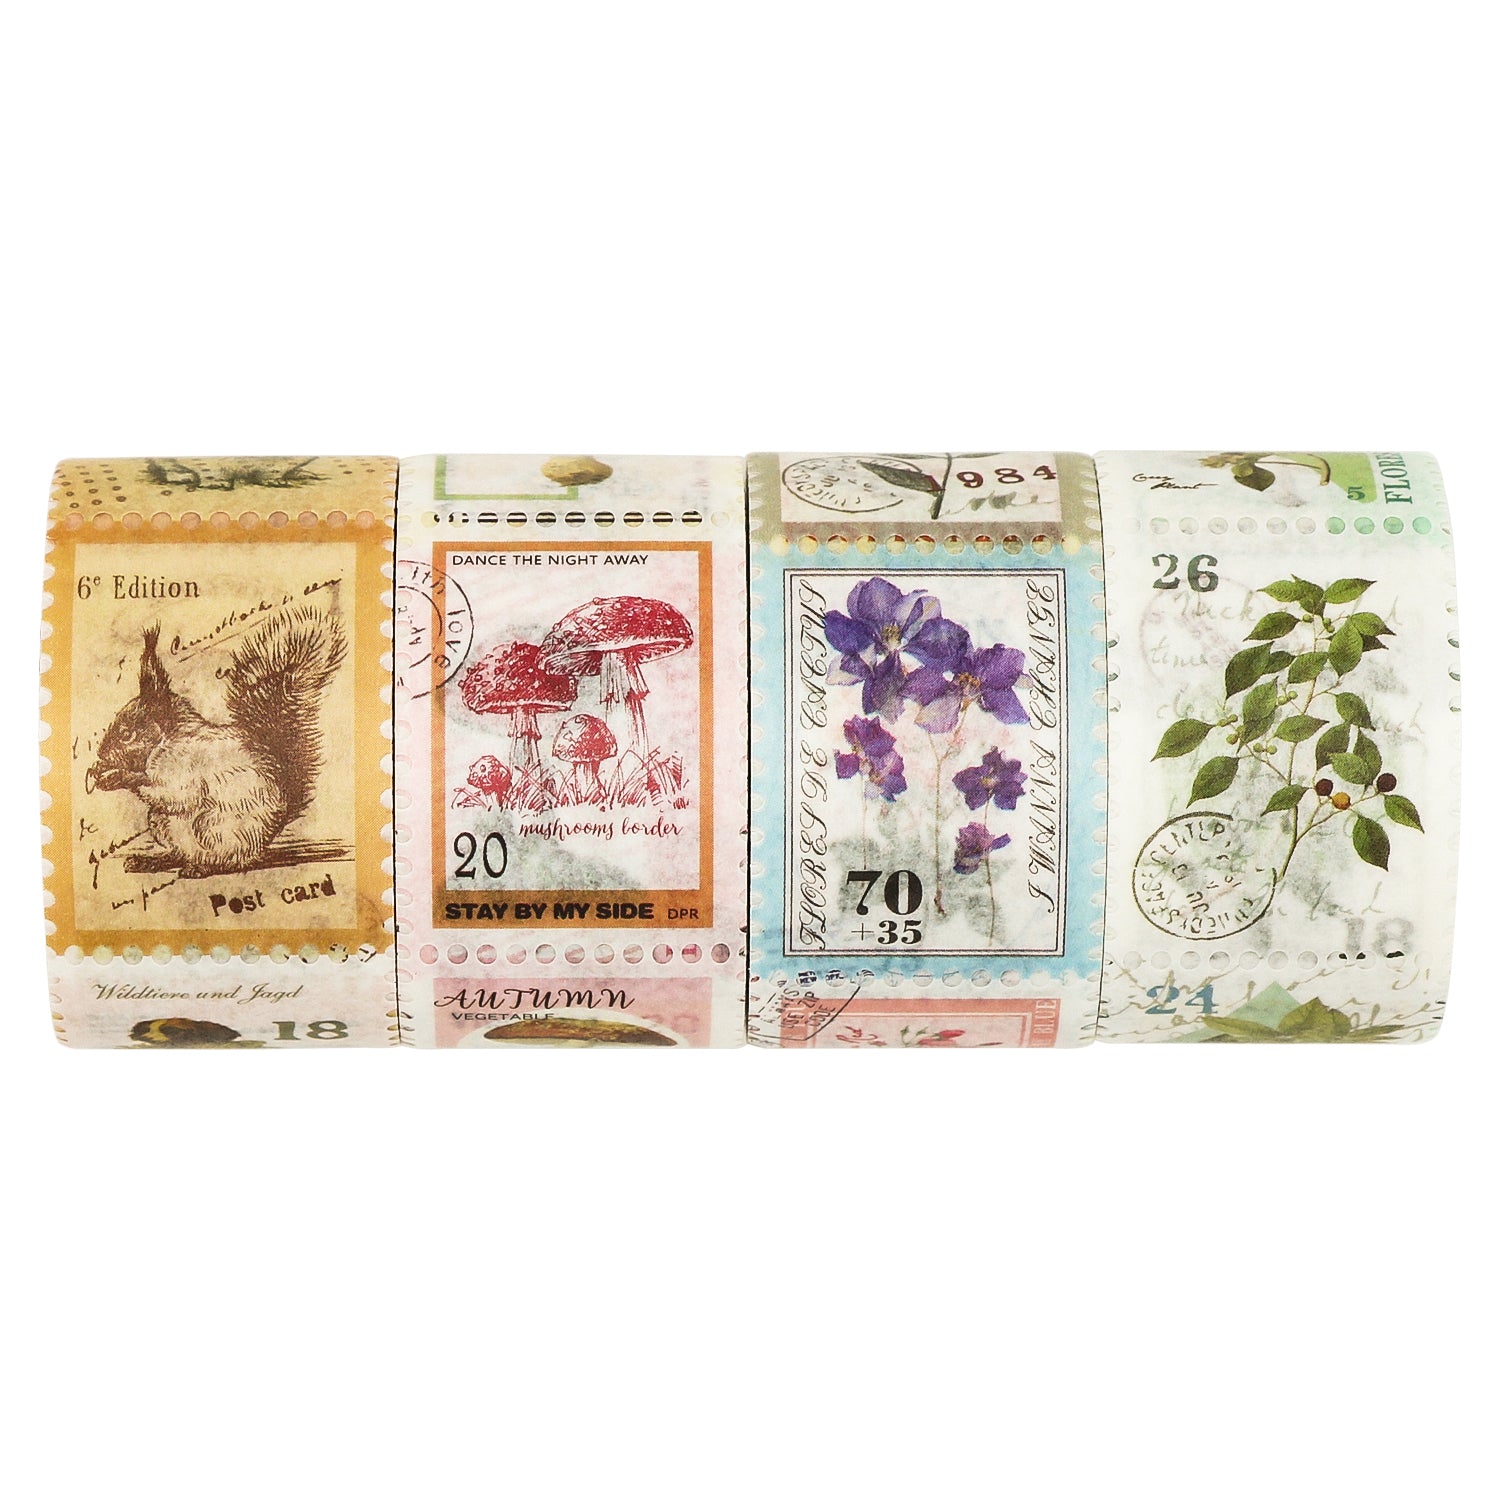 Postage Stamp Stickers